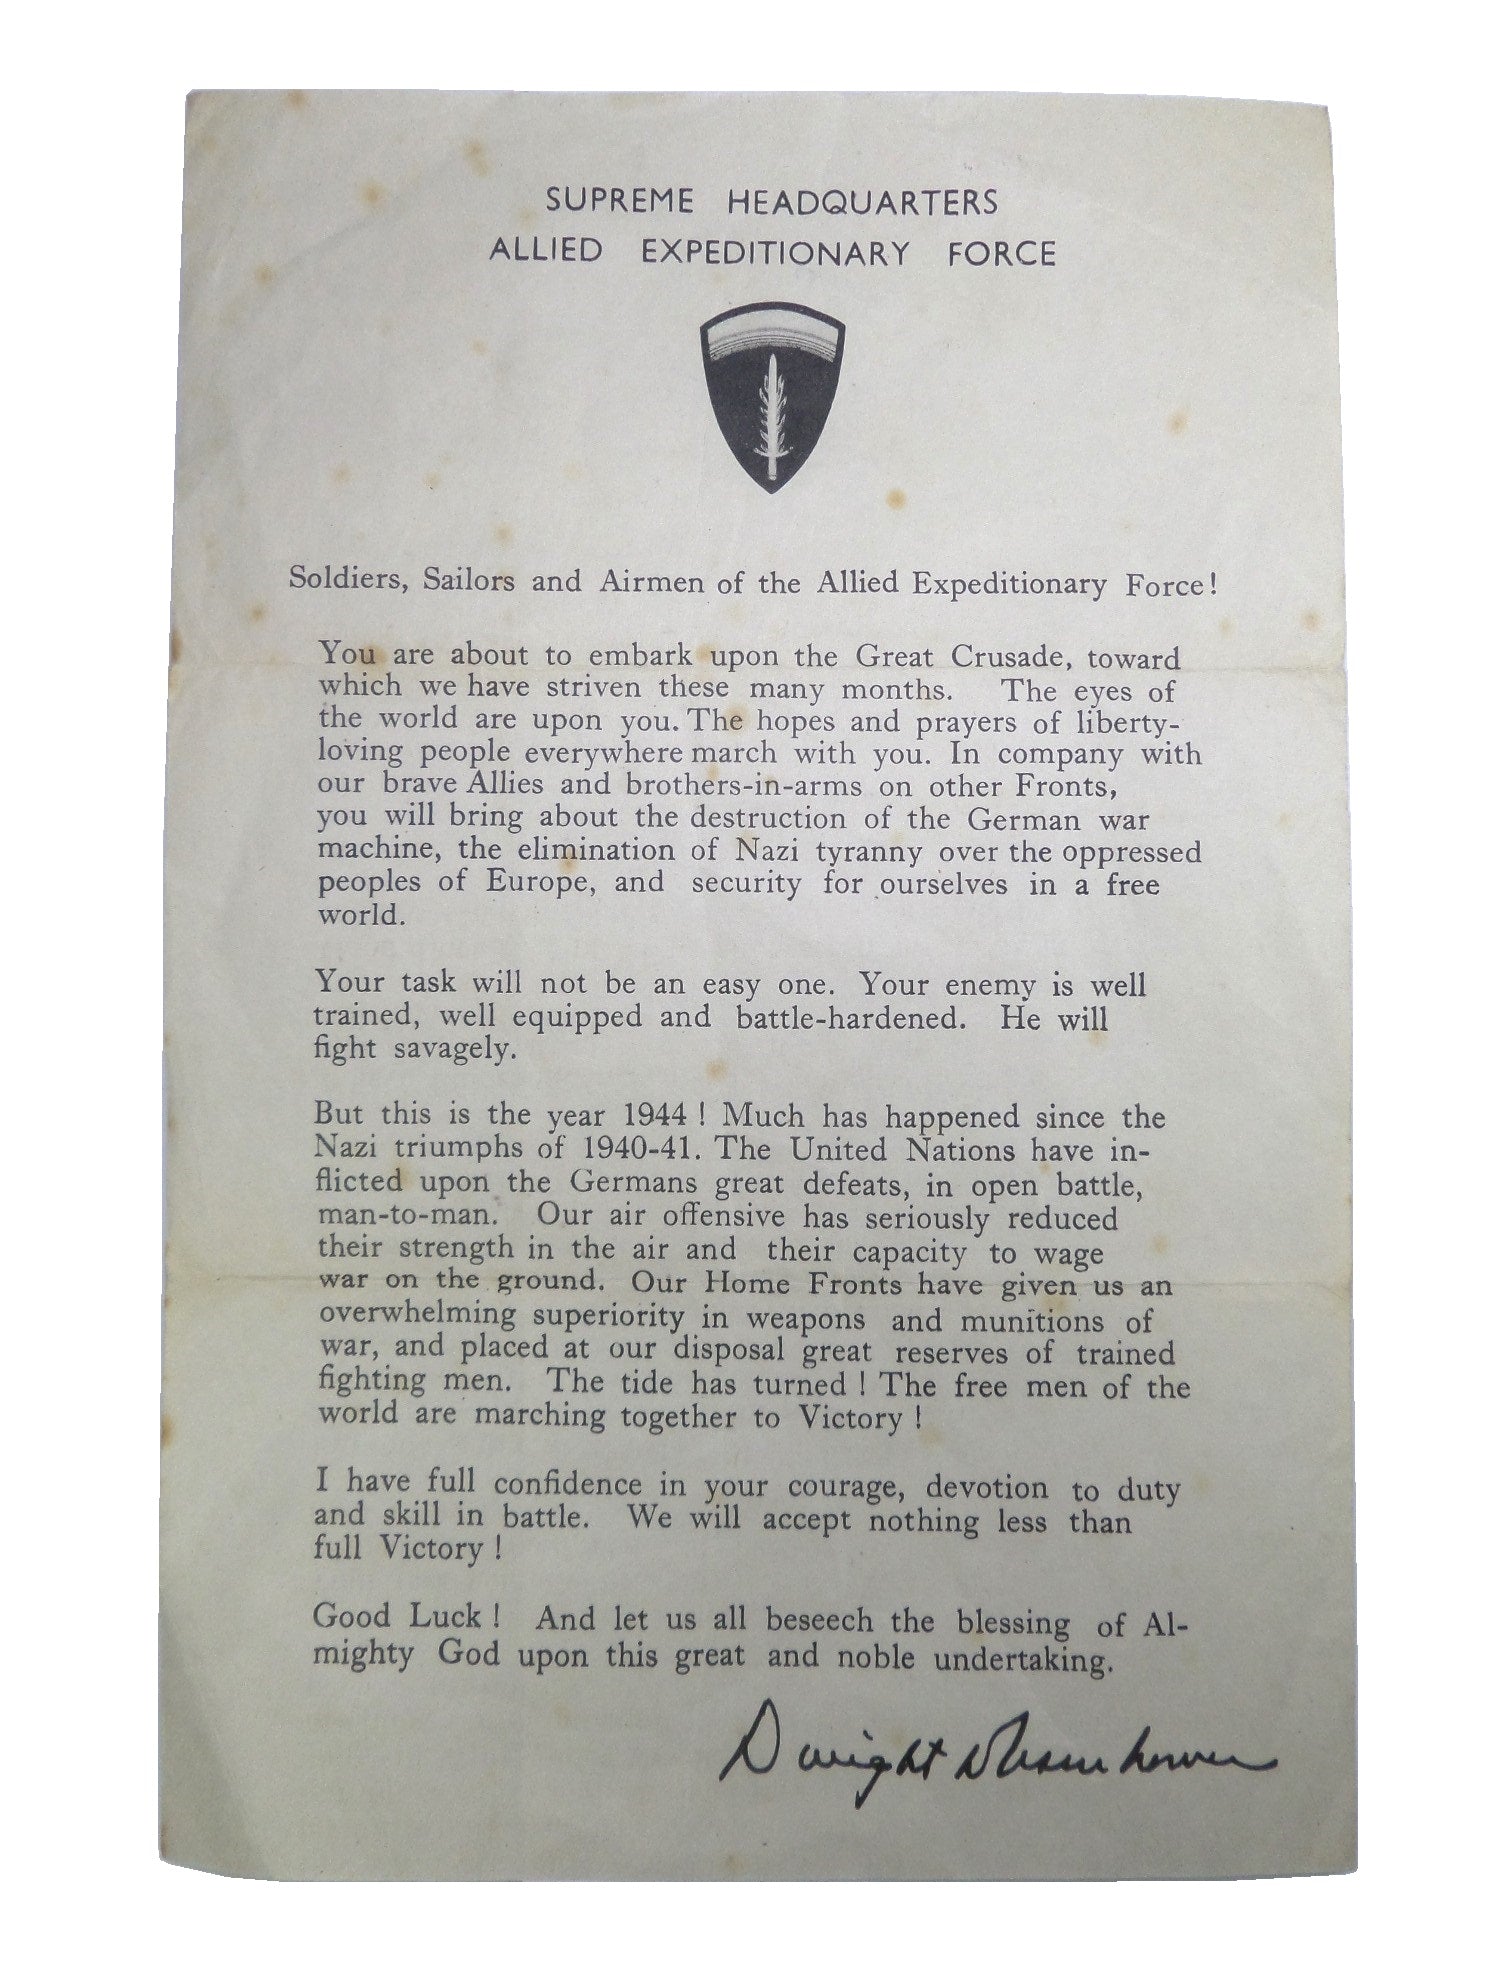 DWIGHT D. EISENHOWER'S ORDER OF THE DAY 6TH JUNE 1944 RARE D-DAY INVASION LETTER